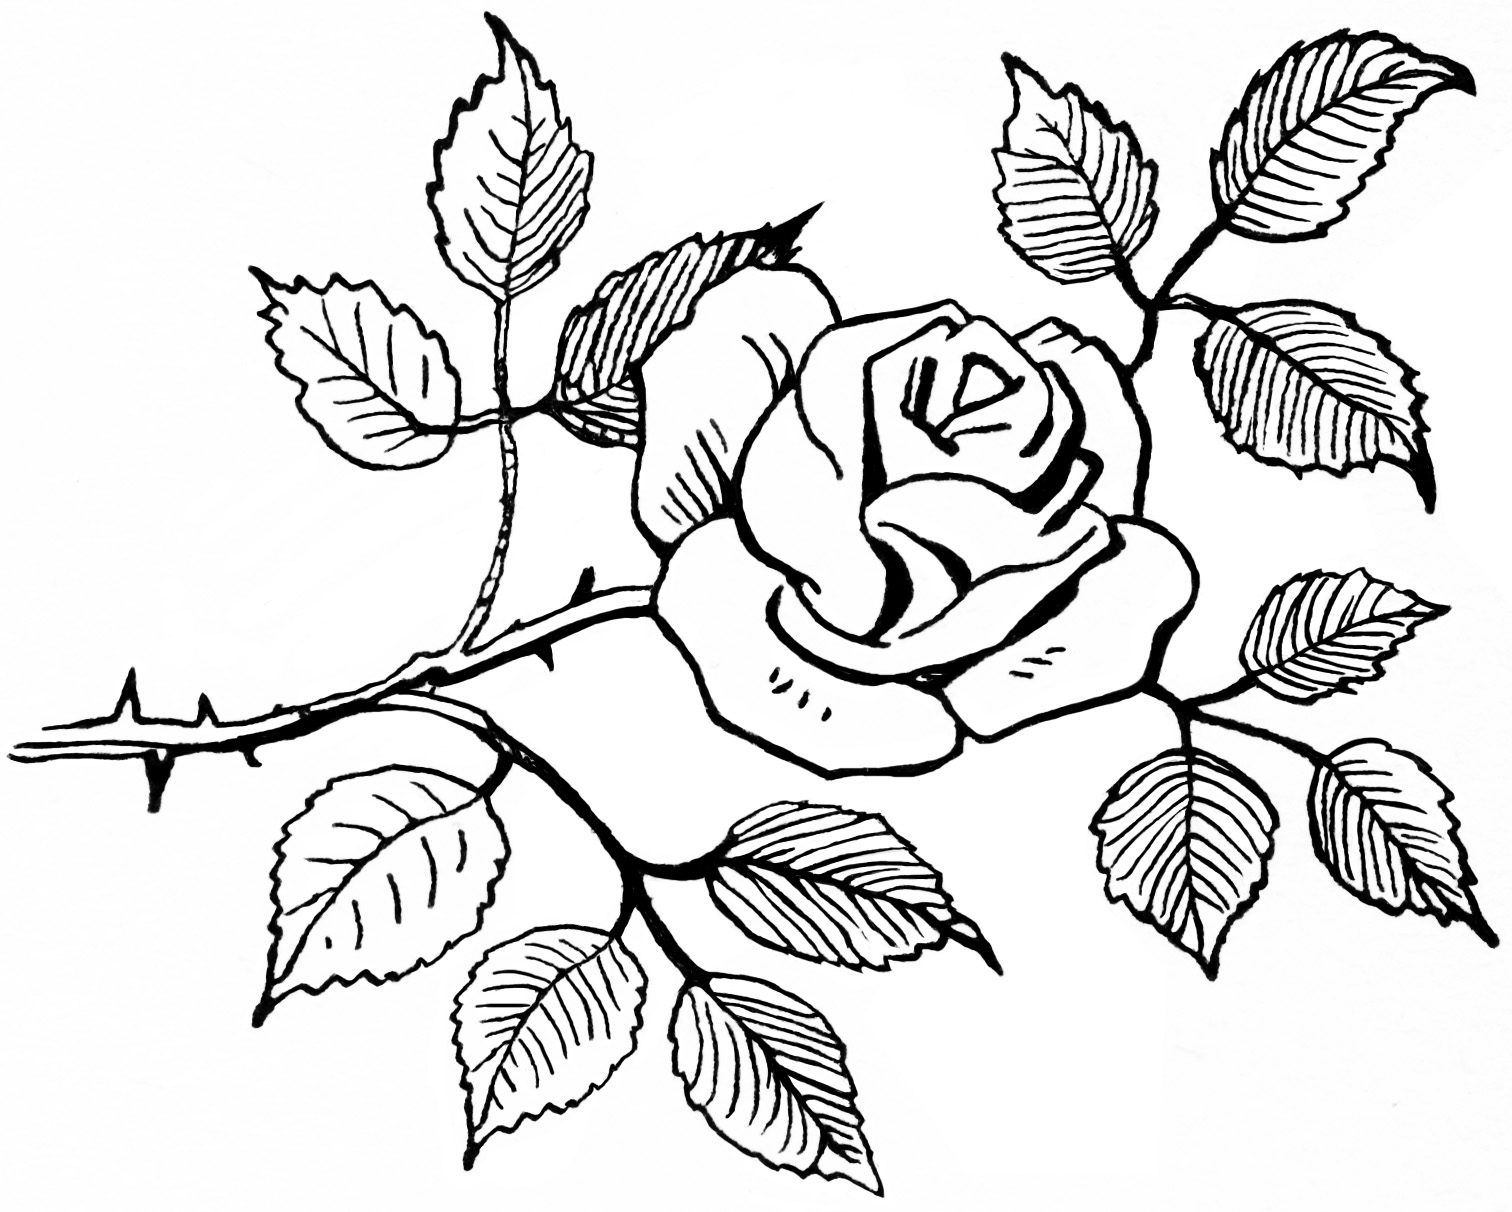 Rose Sketch Black And White - ClipArt Best